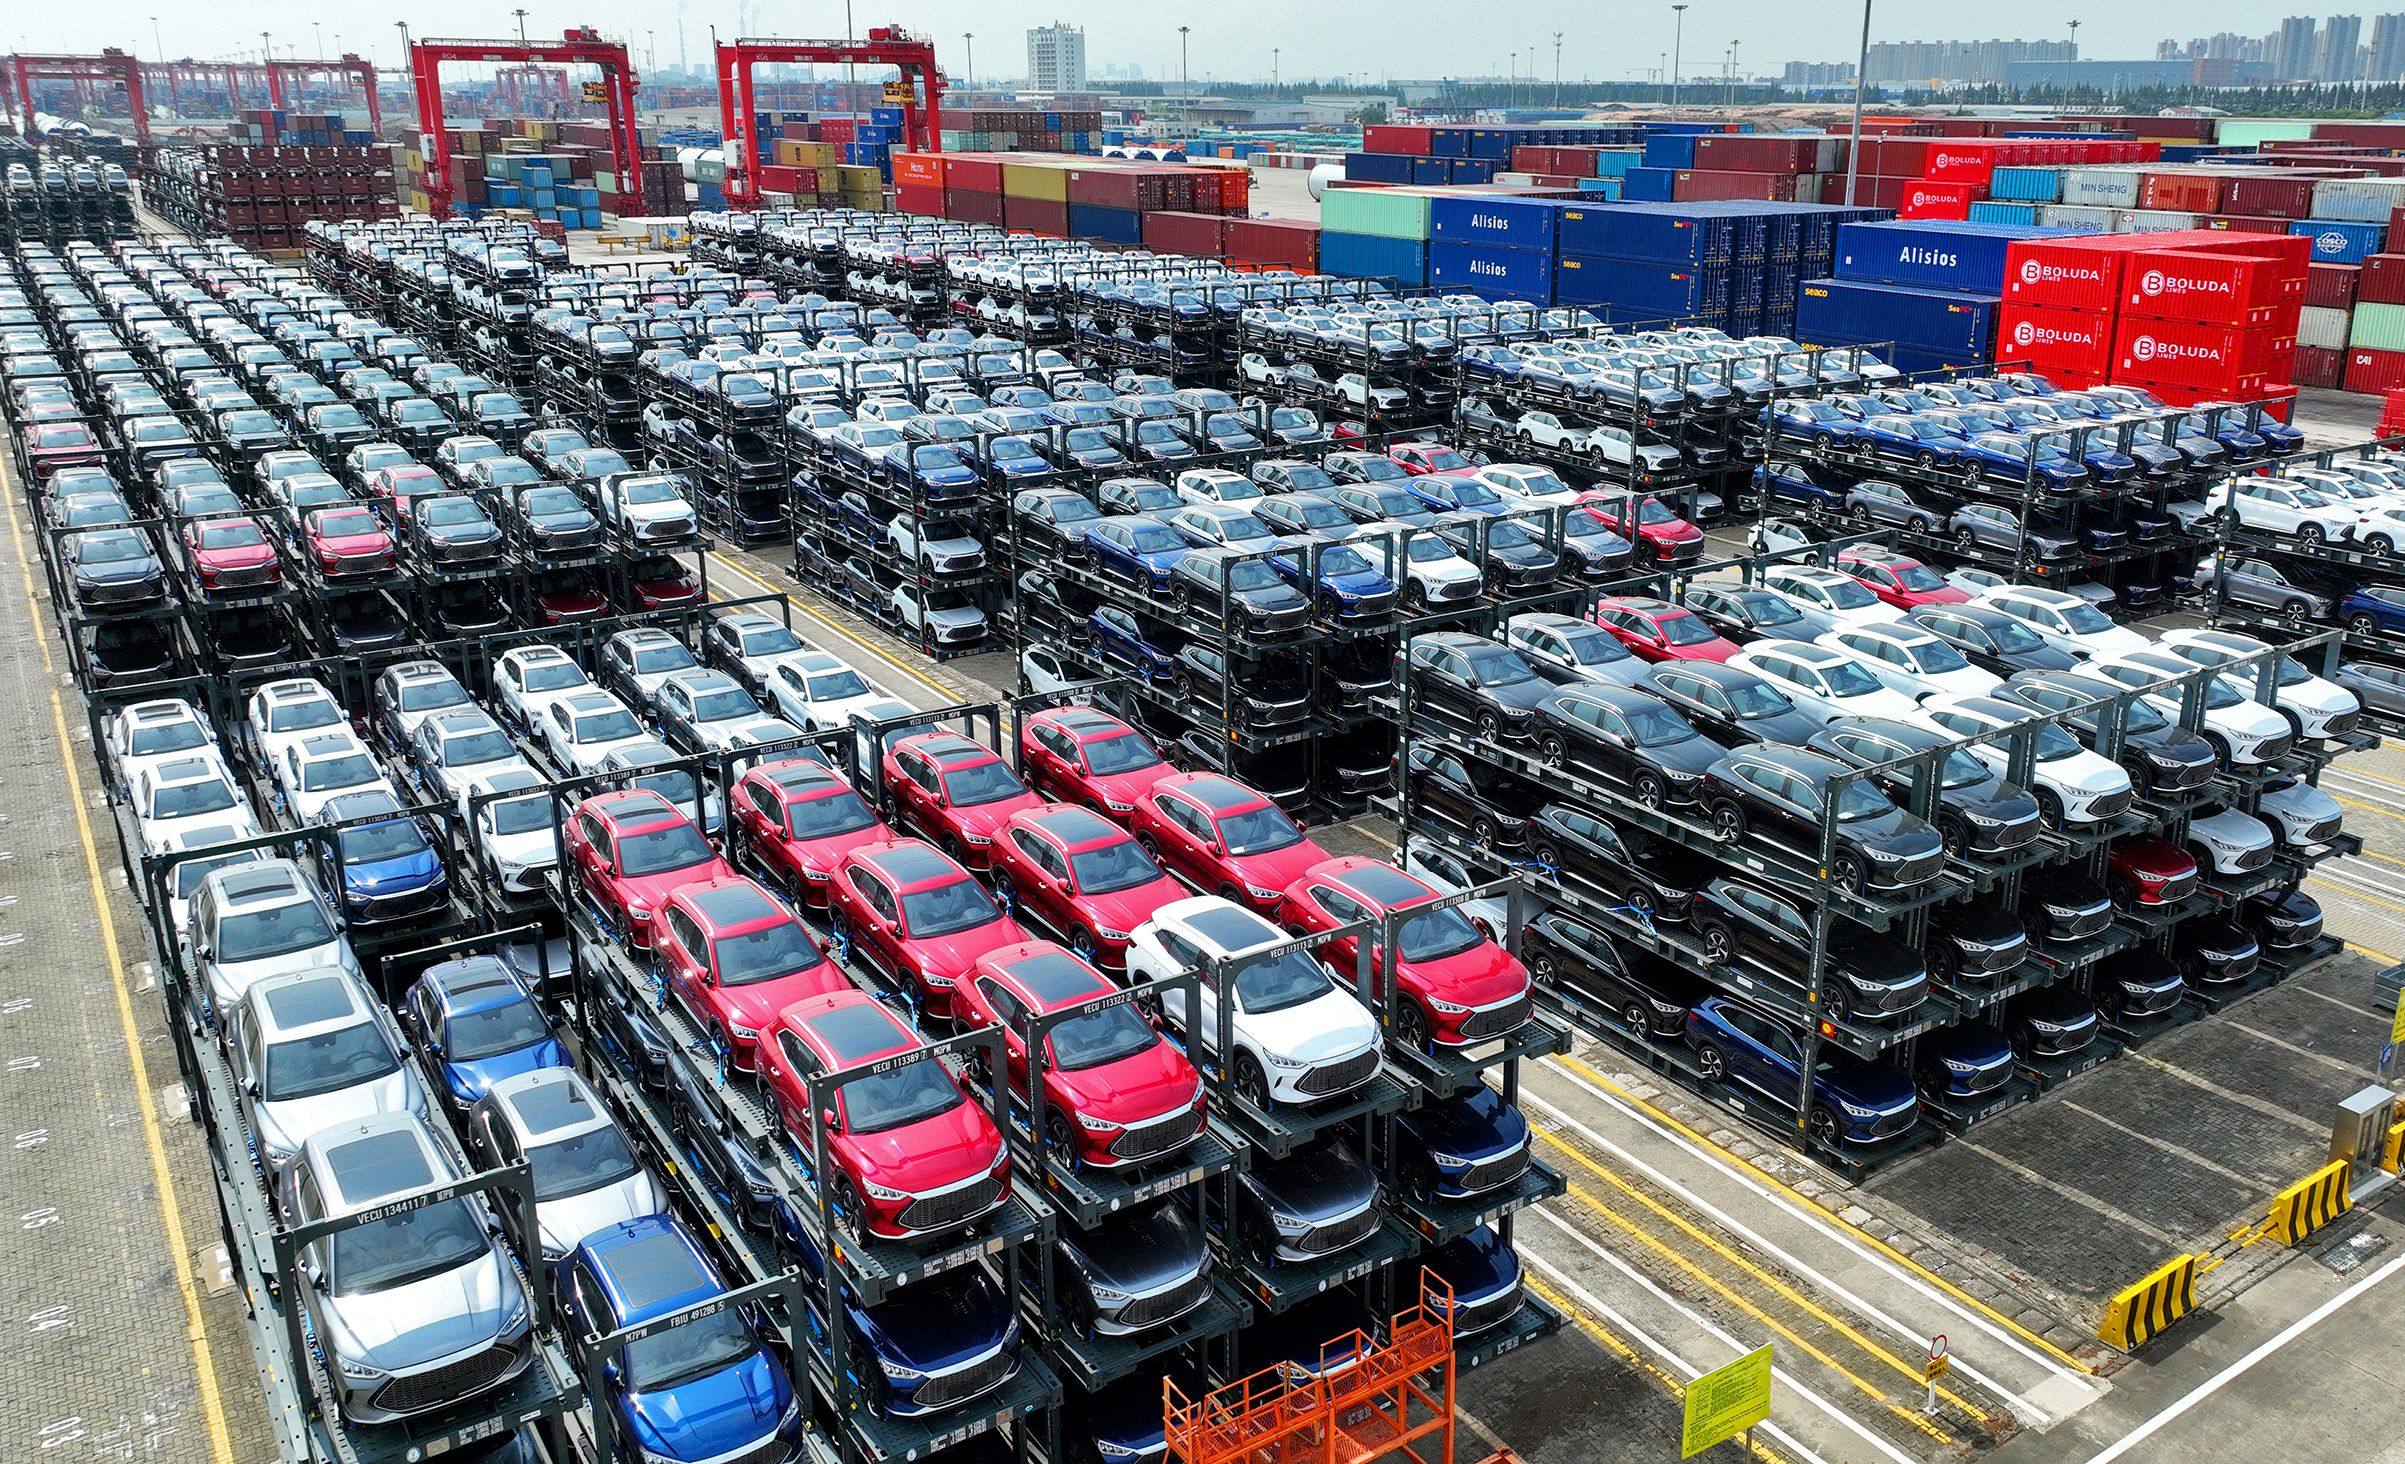 Minister of Commerce Wang Wentao earlier this week expressed “strong dissatisfaction” toward an ongoing EU investigation into China’s exports of EVs and related products. Photo: AFP